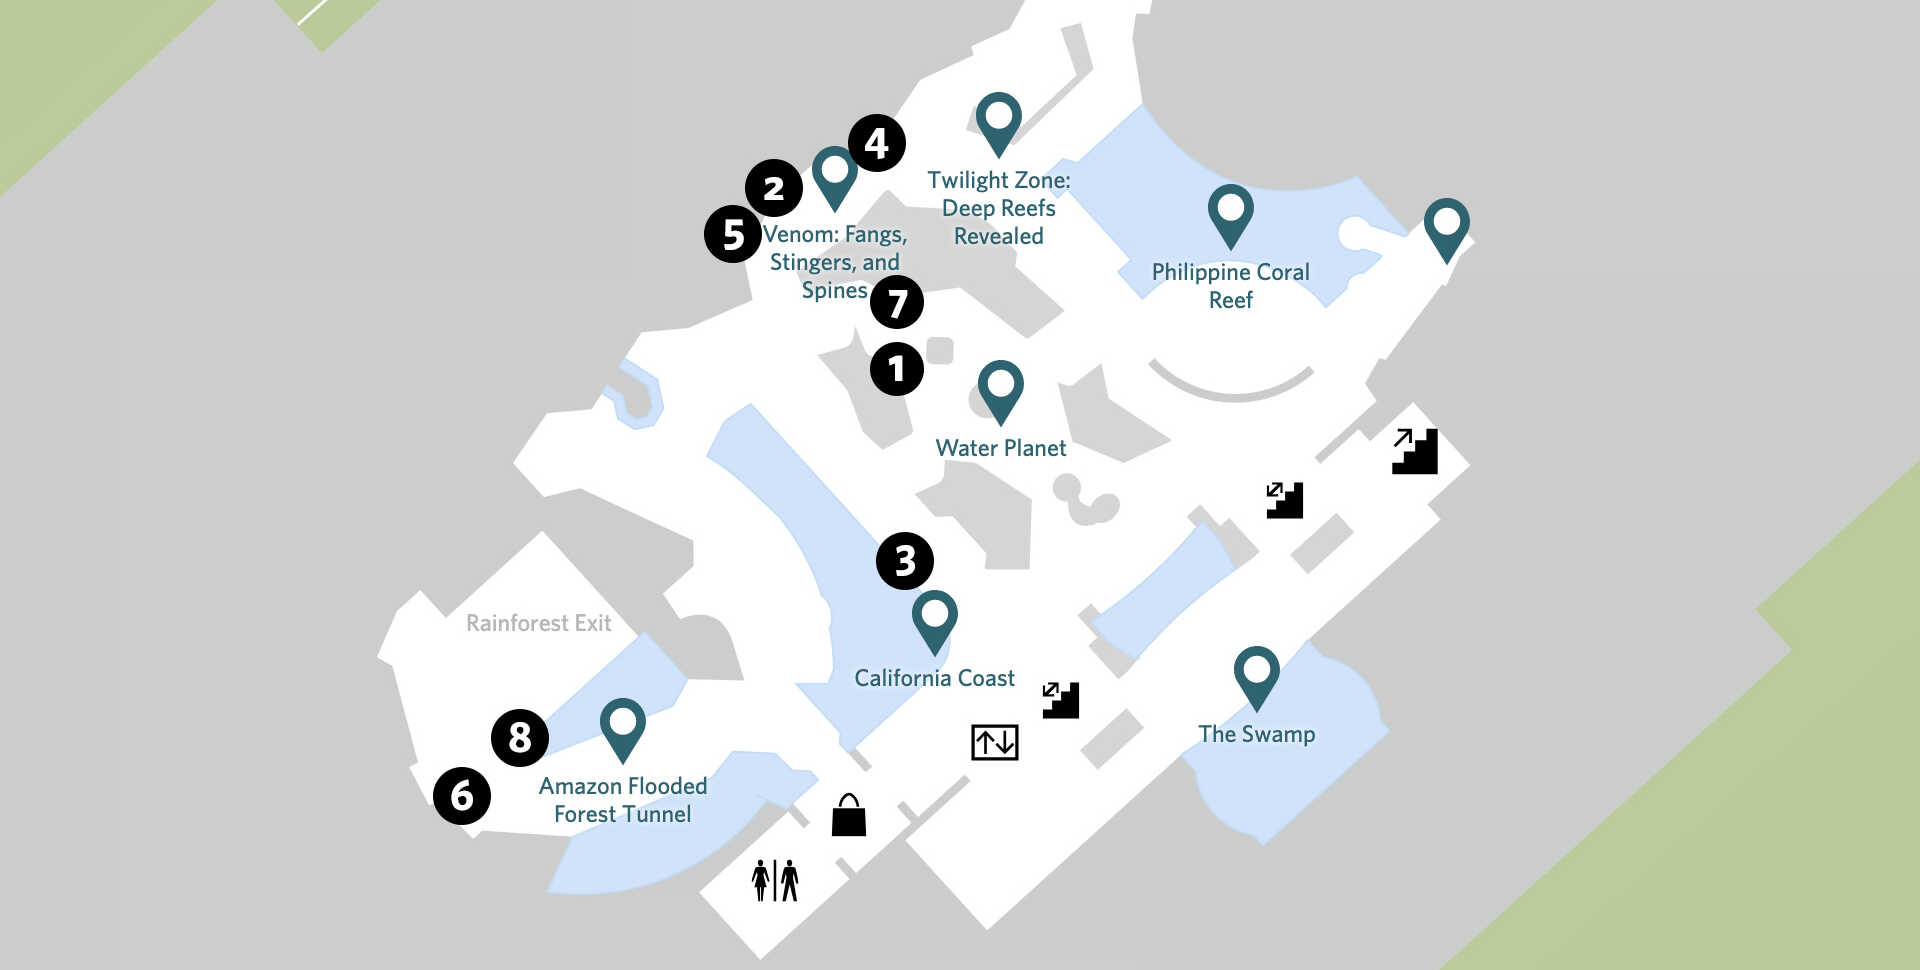 Map of Steinhart Aquarium with numbered icons indicating where animals are on exhibit